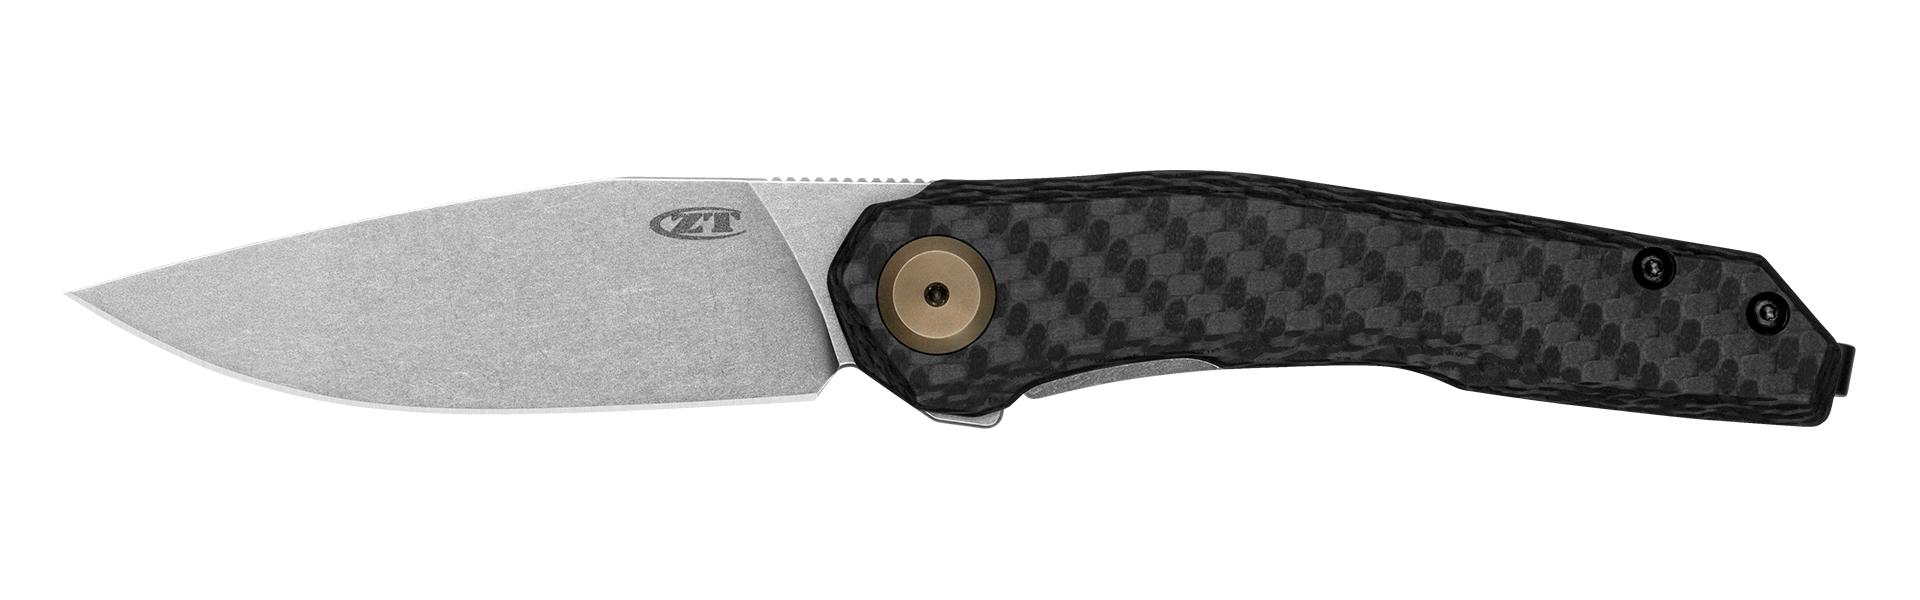 Zero Tolerance 0545 Flipper Knife 3.2" CPM-MagnaCut Stonewashed Drop Point Blade Carbon Fiber from NORTH RIVER OUTDOORS